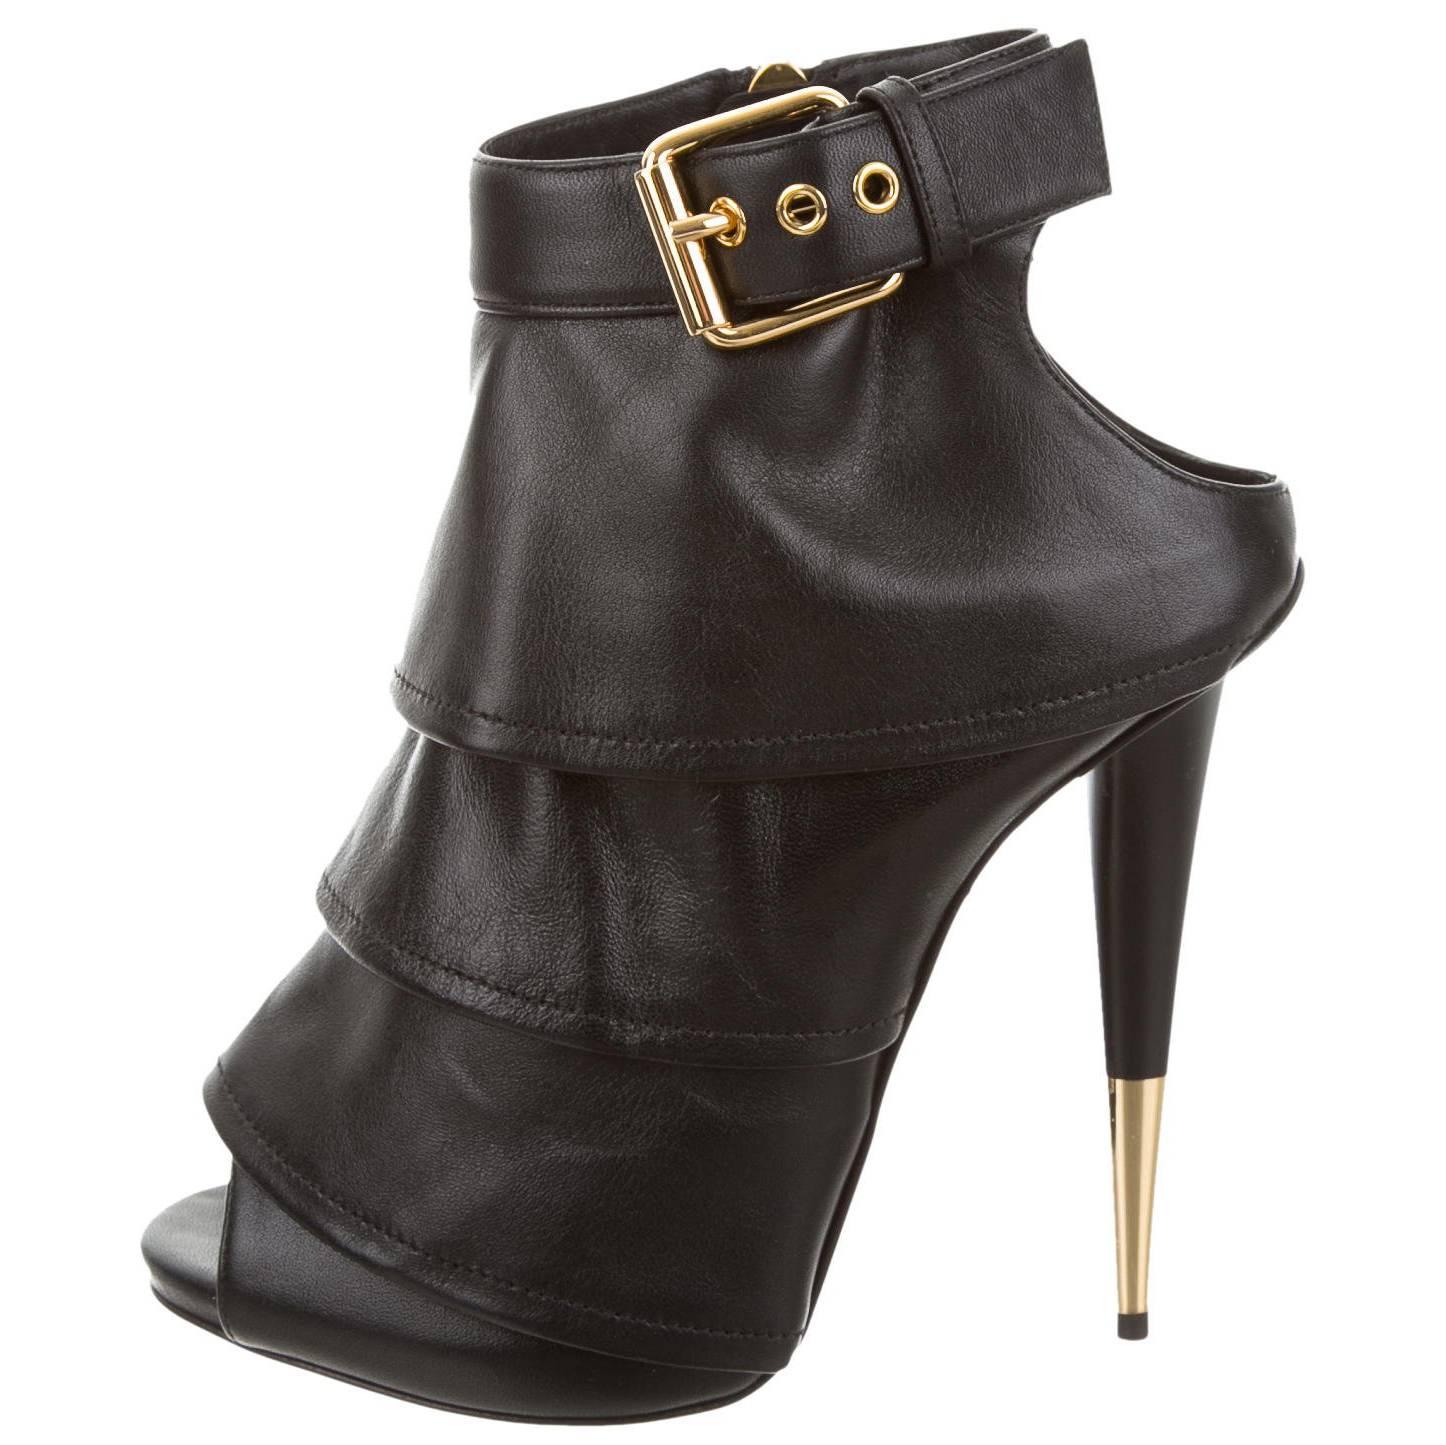 Giuseppe Zanotti NEW & SOLD OUT Black Leather Gold Heels in Box